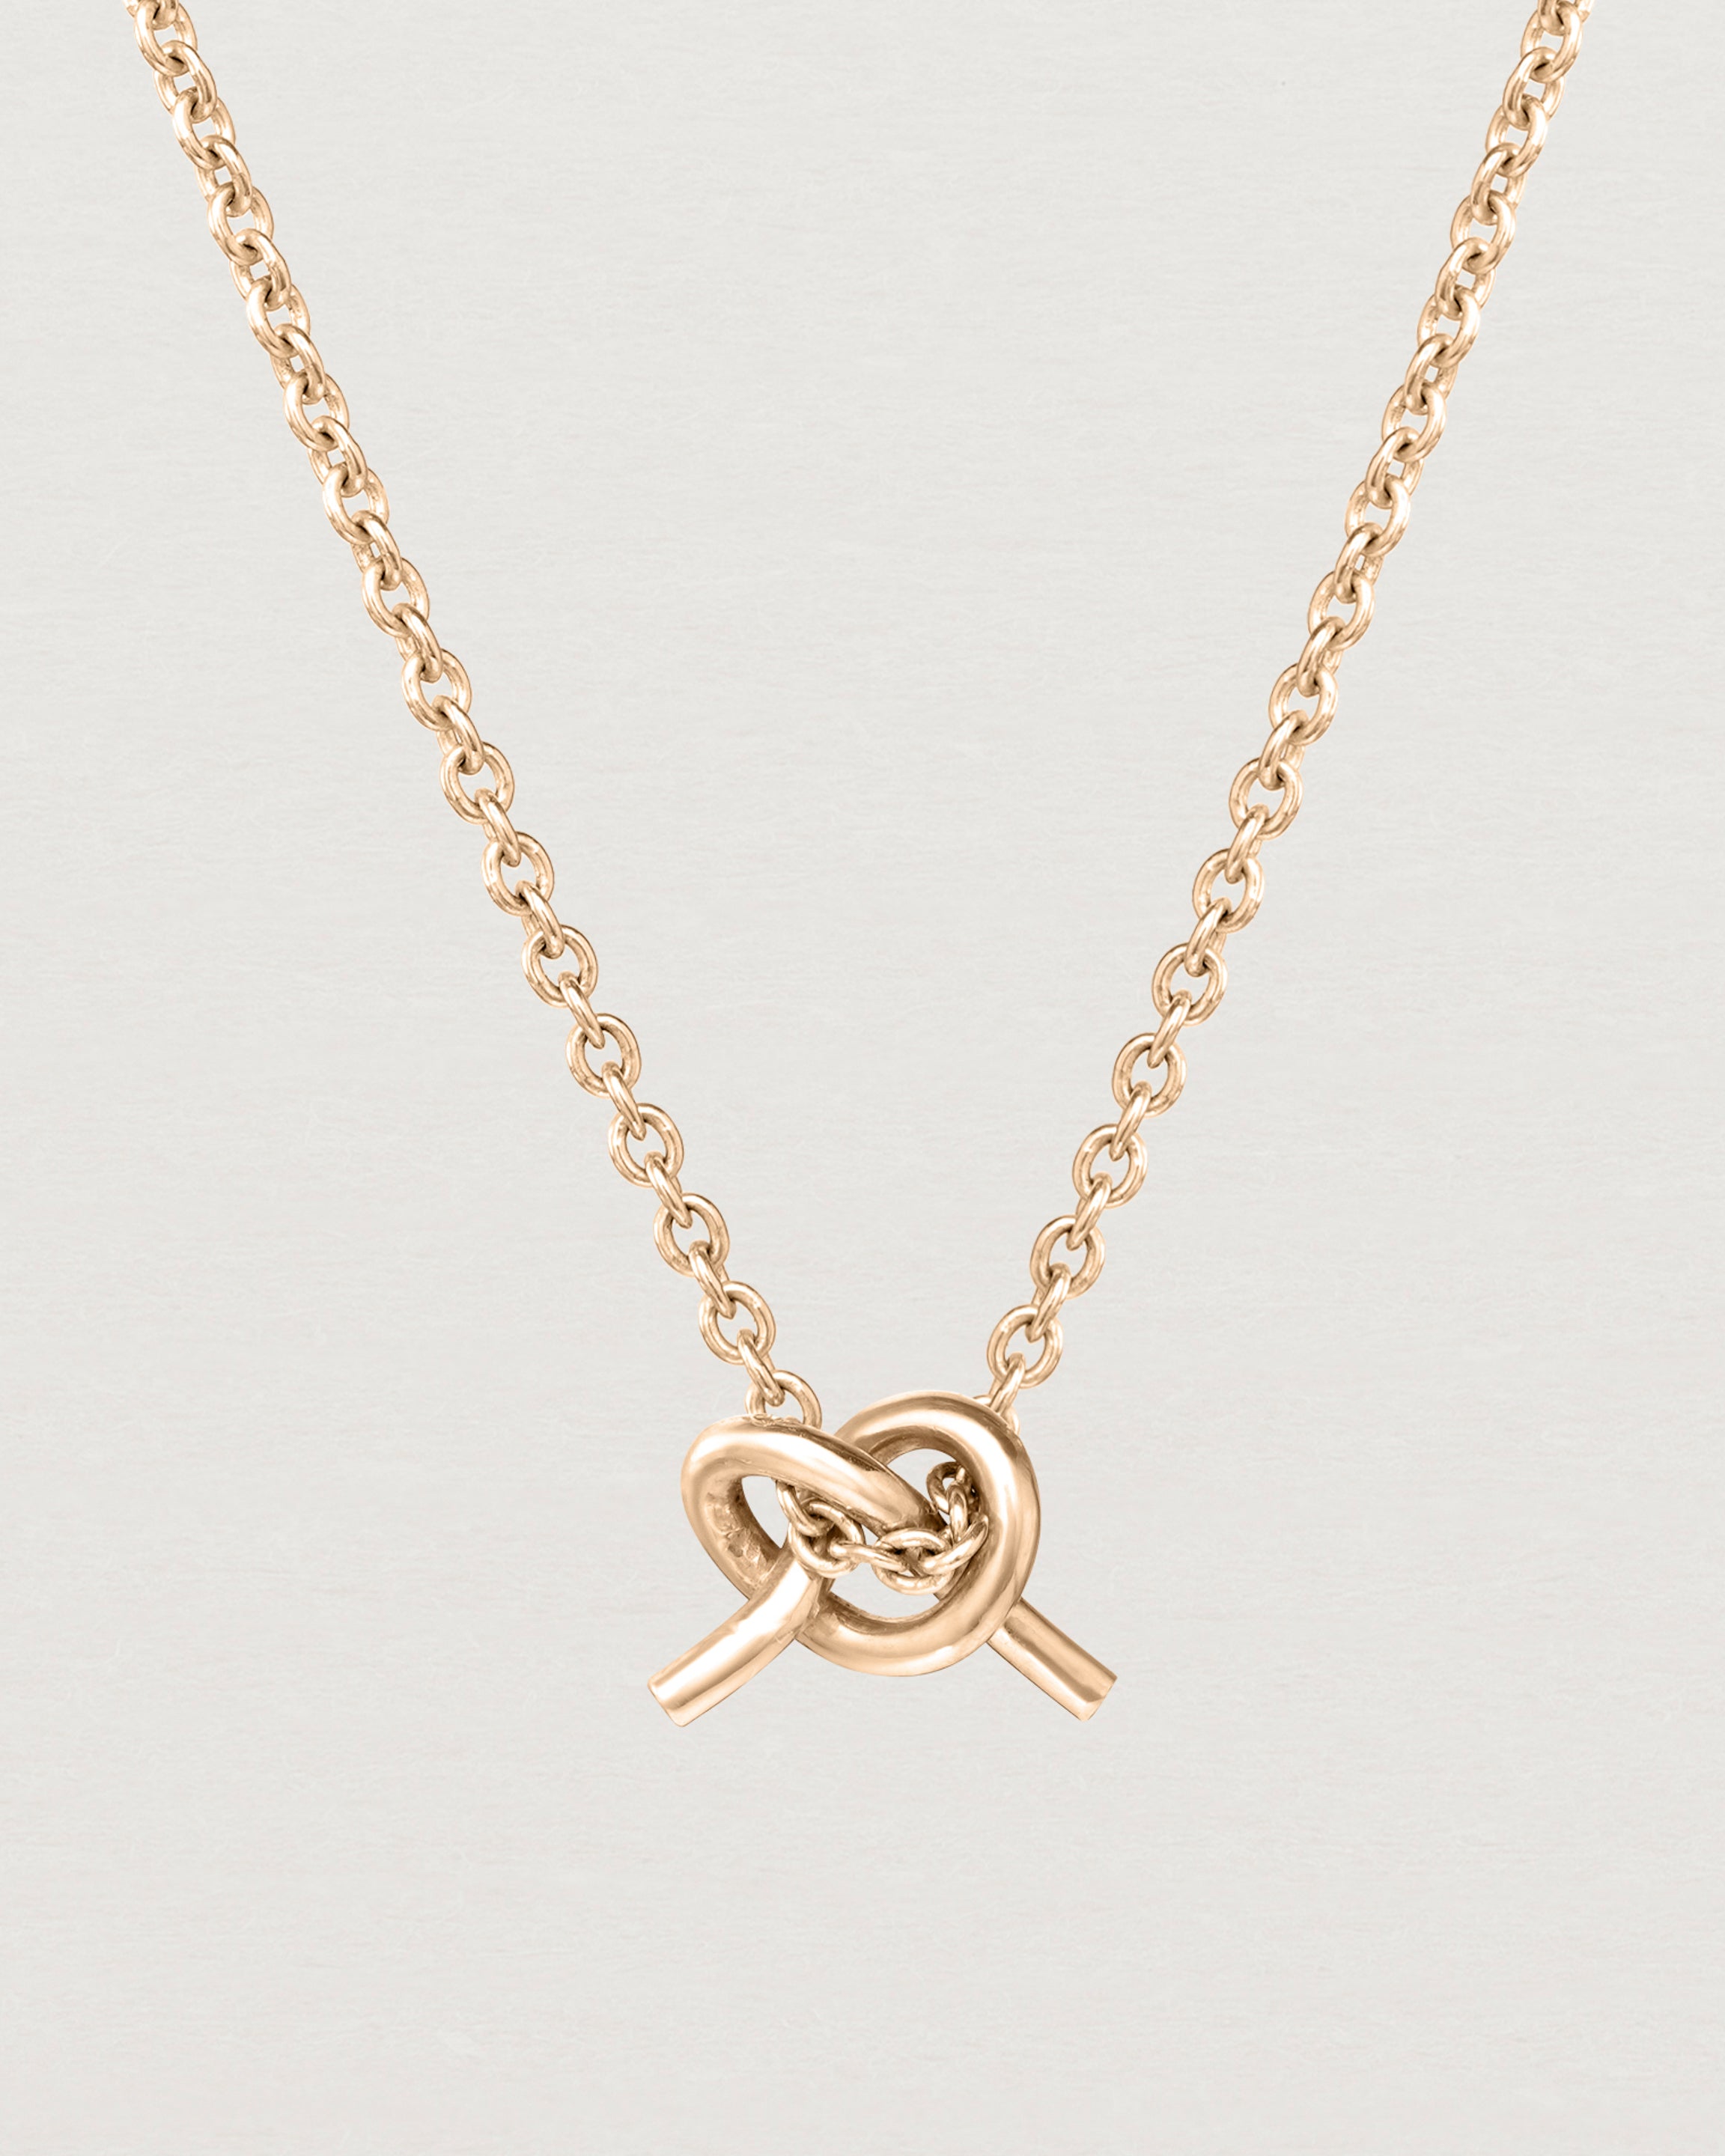 Front view of the Cara Necklace in rose gold.